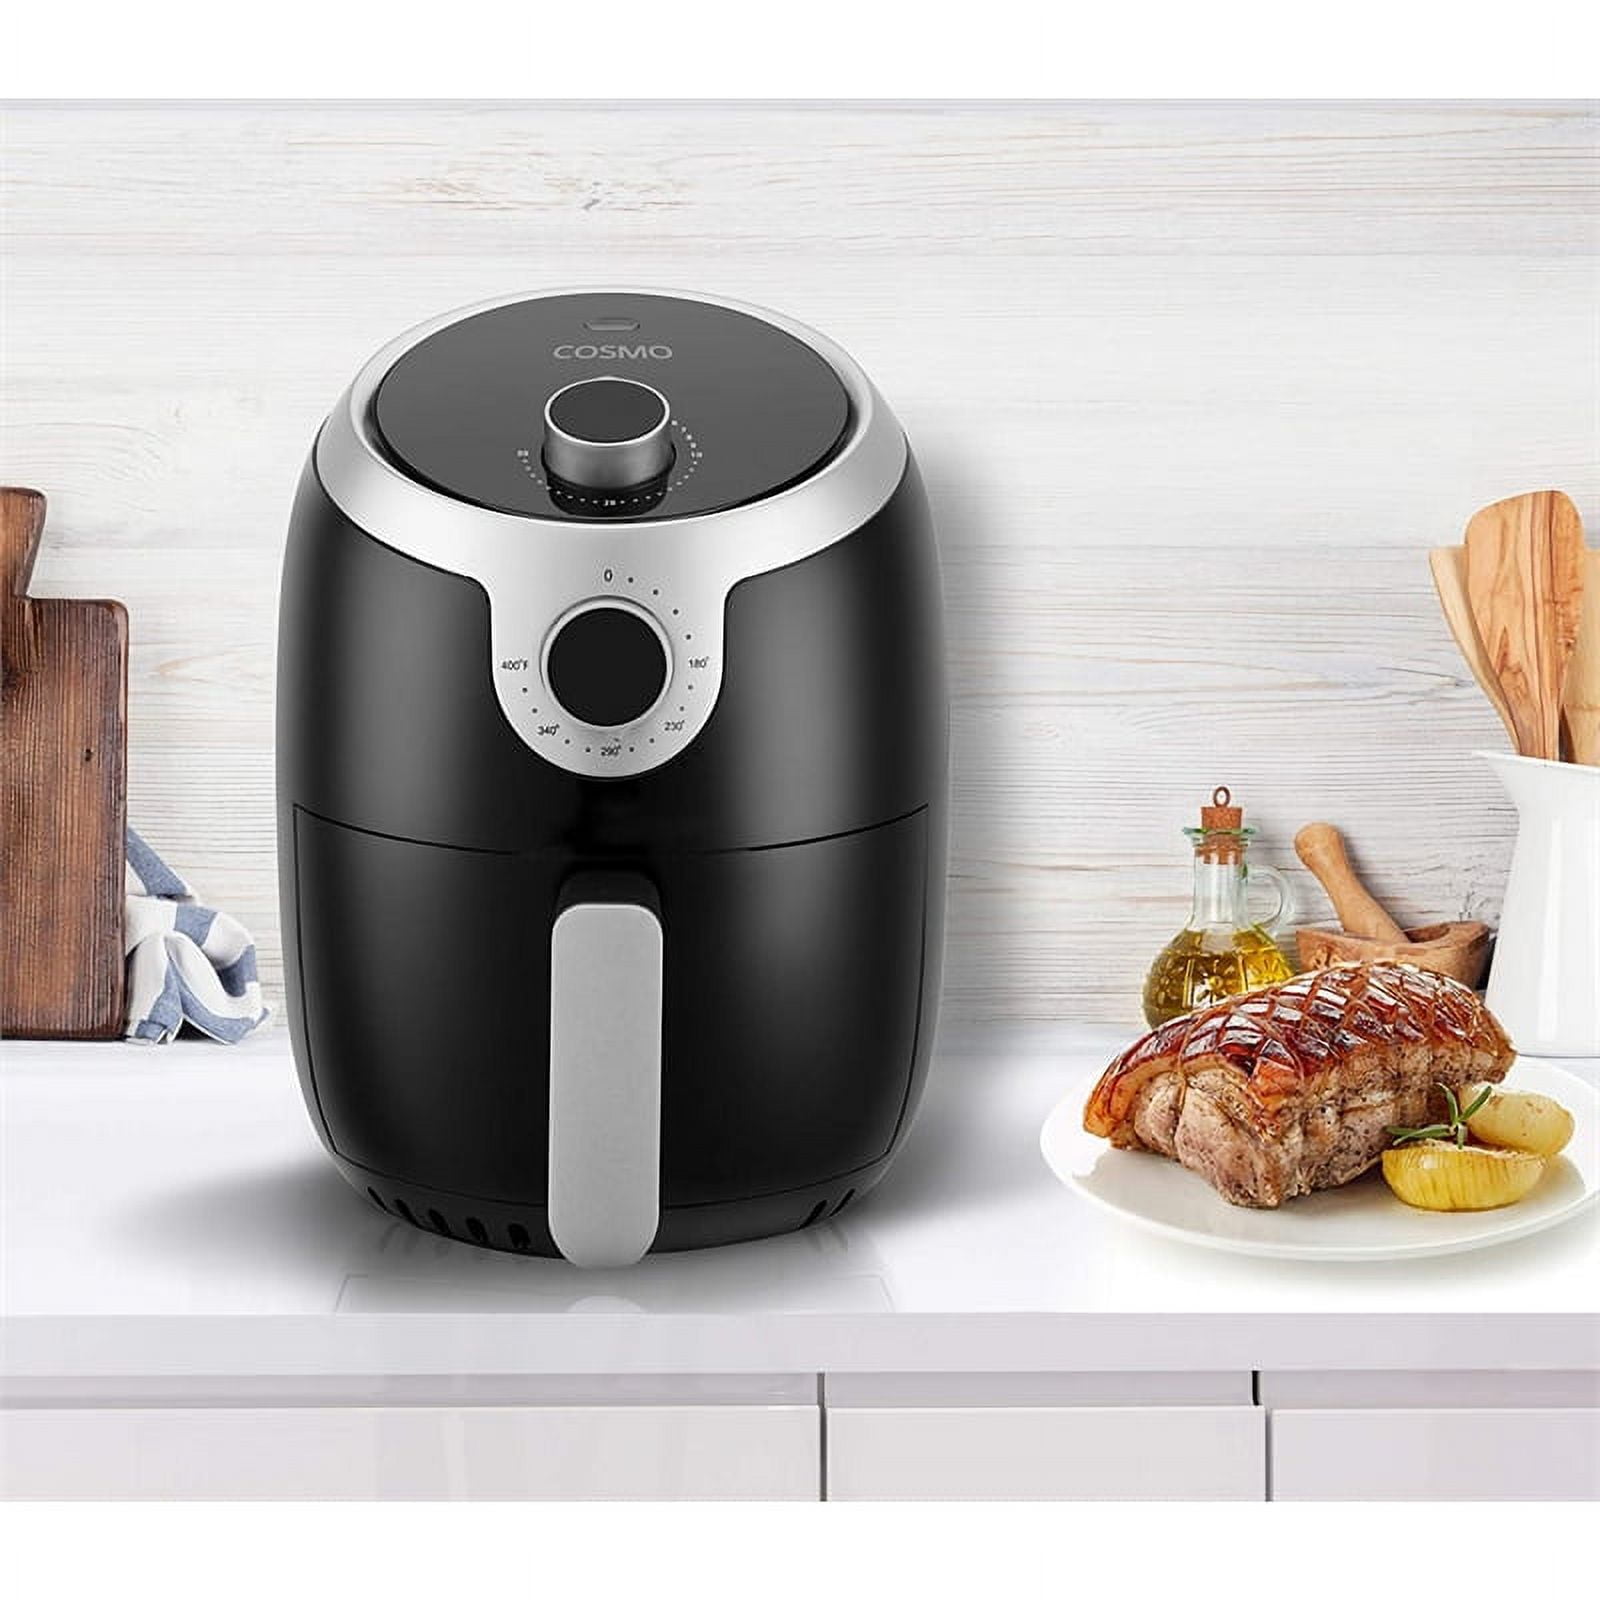 Cosmo COS-58AFAKSS 5.5 Liter Electric Hot Air Fryer with Temperature Control, Timer, Non-Stick Frying Tray, 1400W (5.8 Quarts, Stainless Steel /